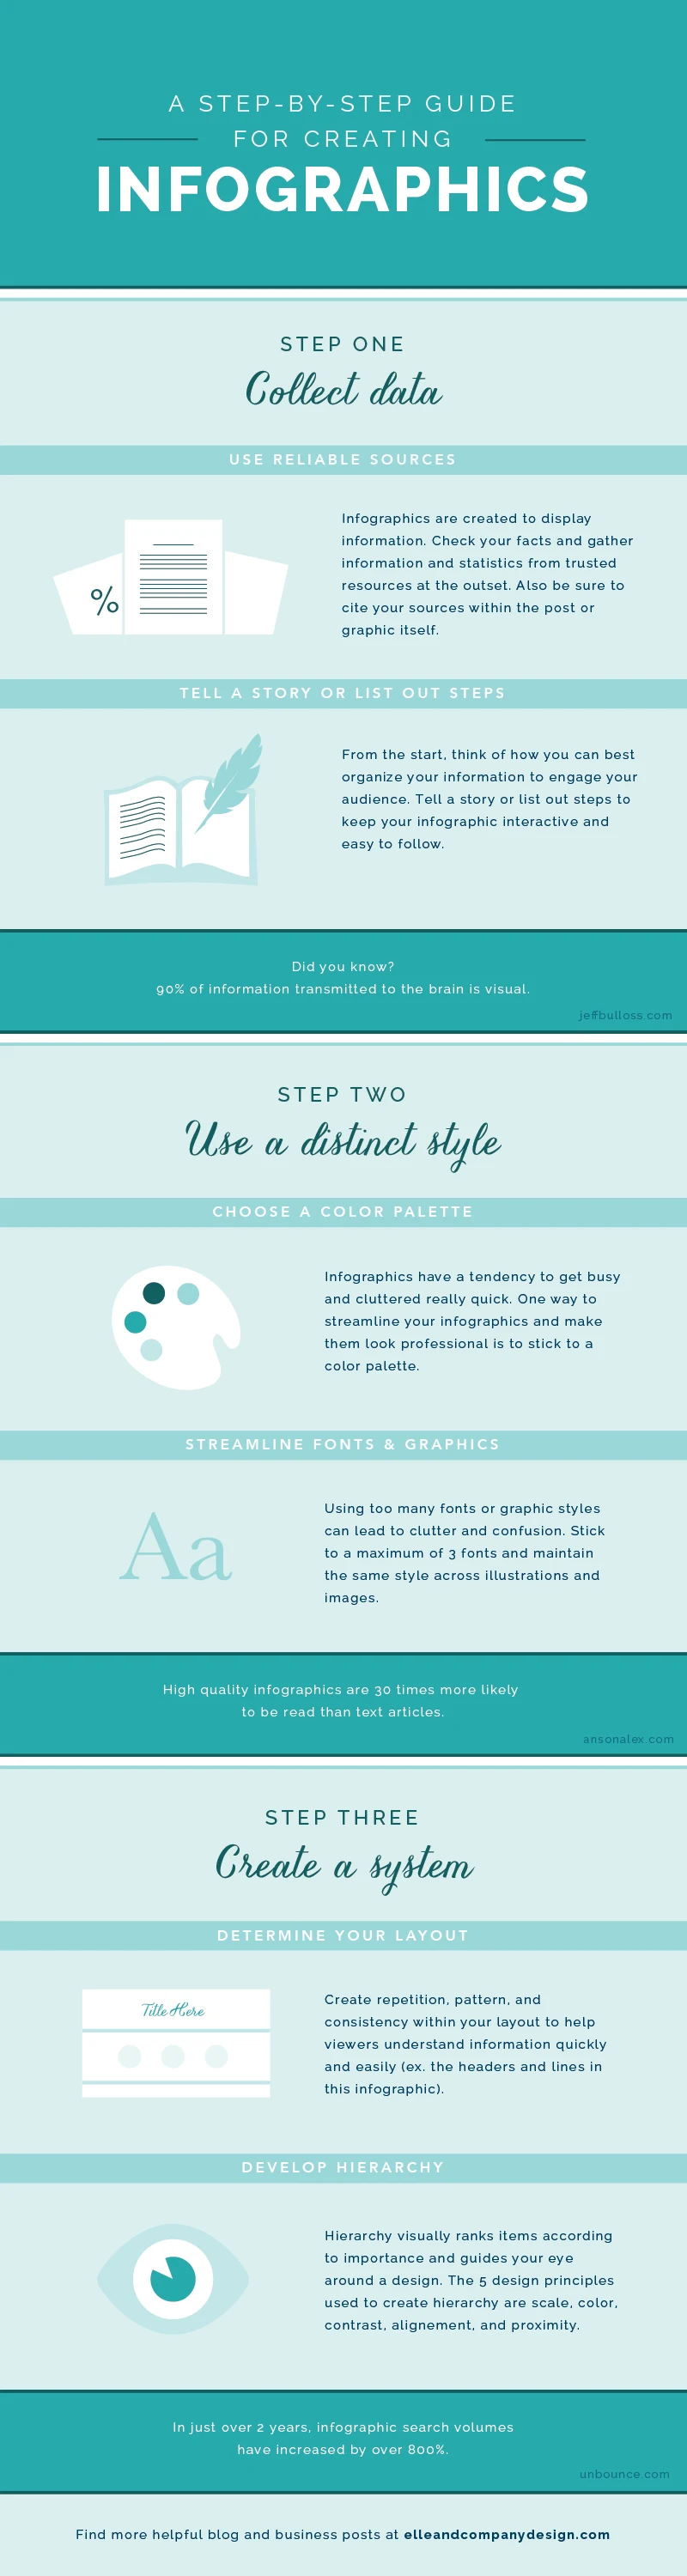 A Step-By-Step Guide for Creating Infographics